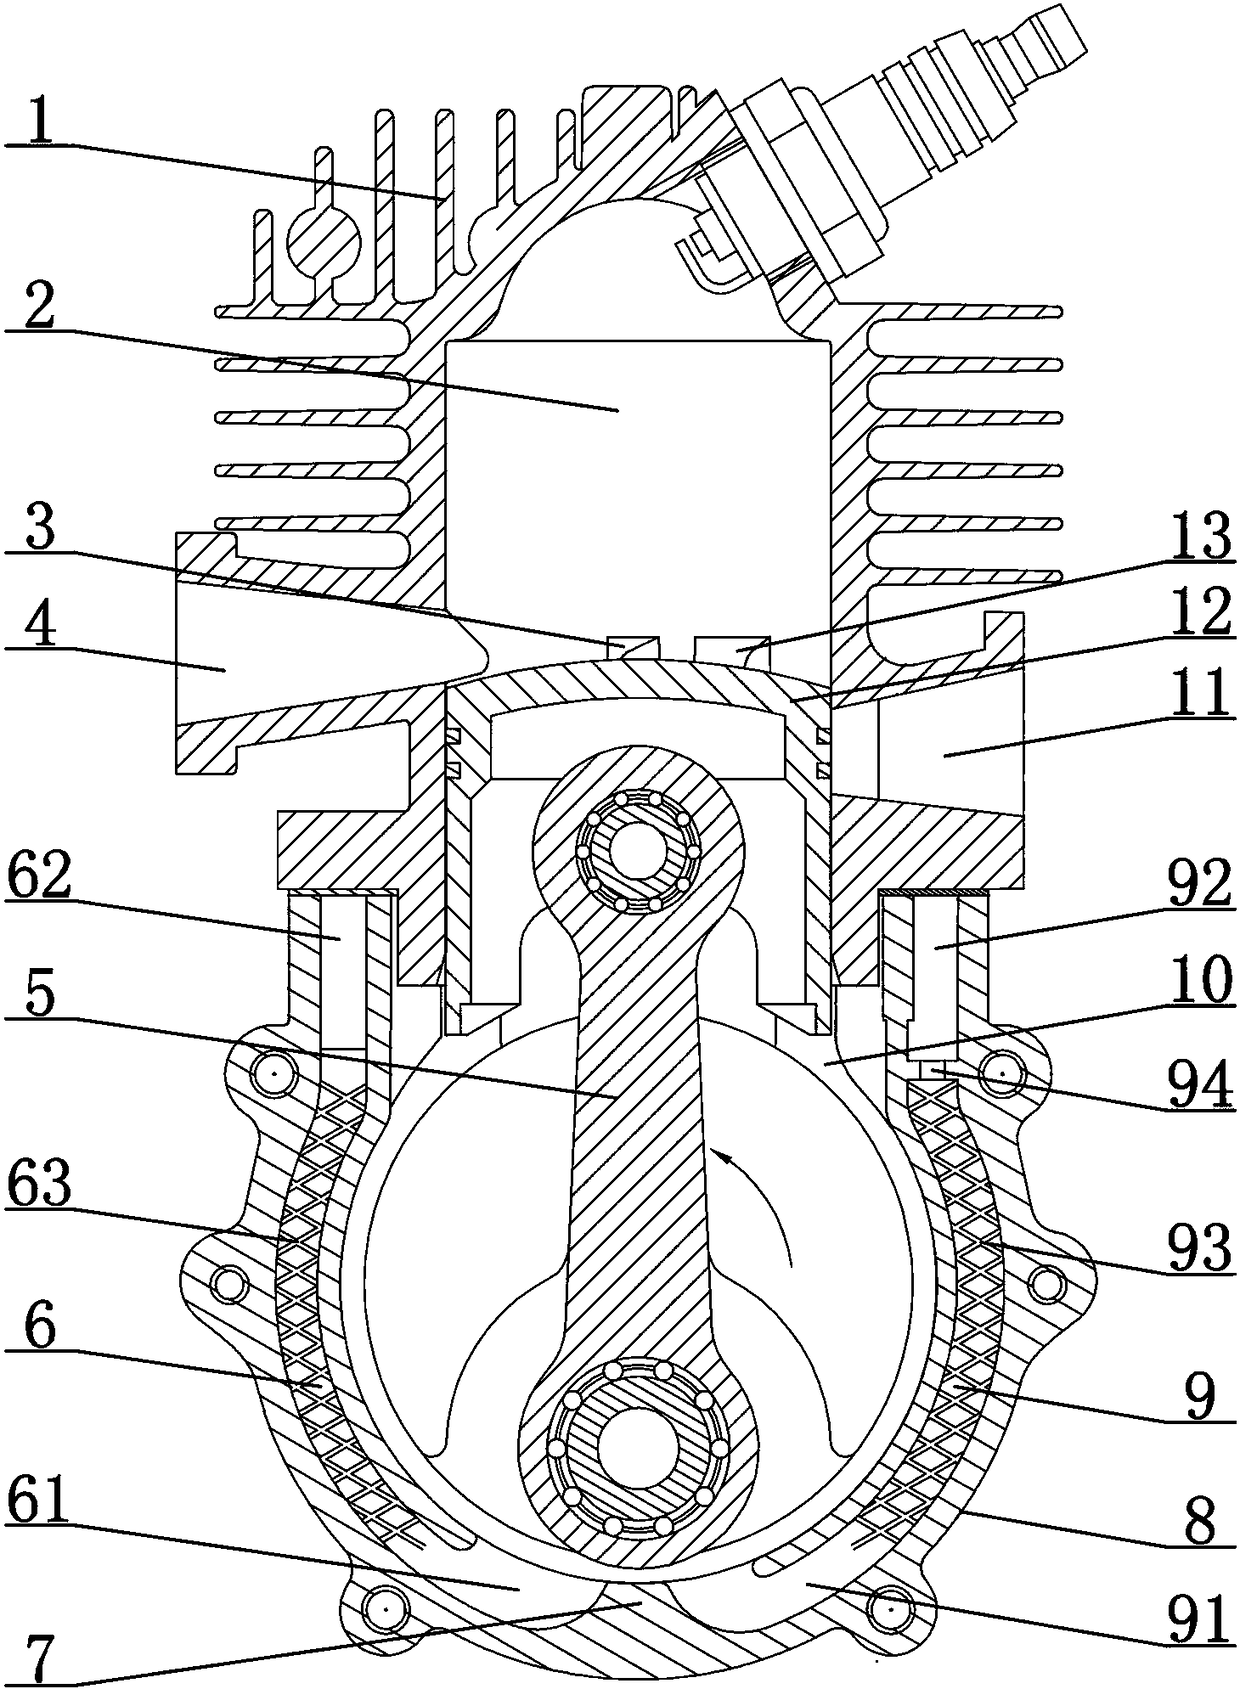 A scavenging system for a two-stroke engine